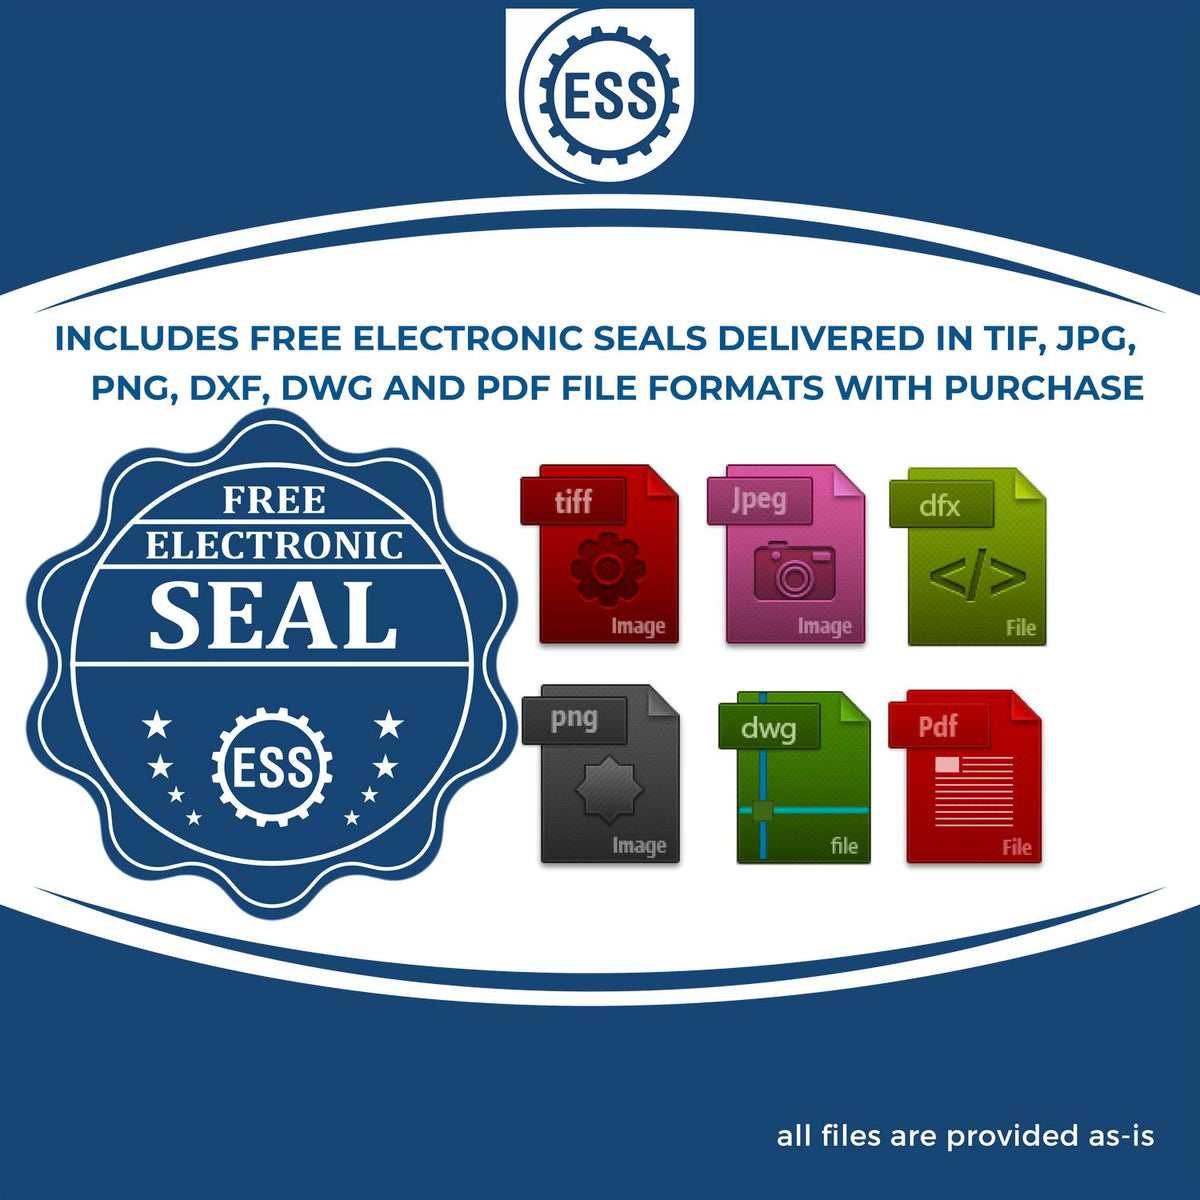 An infographic for the free electronic seal for the Premium MaxLight Pre-Inked Nebraska Geology Stamp illustrating the different file type icons such as DXF, DWG, TIF, JPG and PNG.